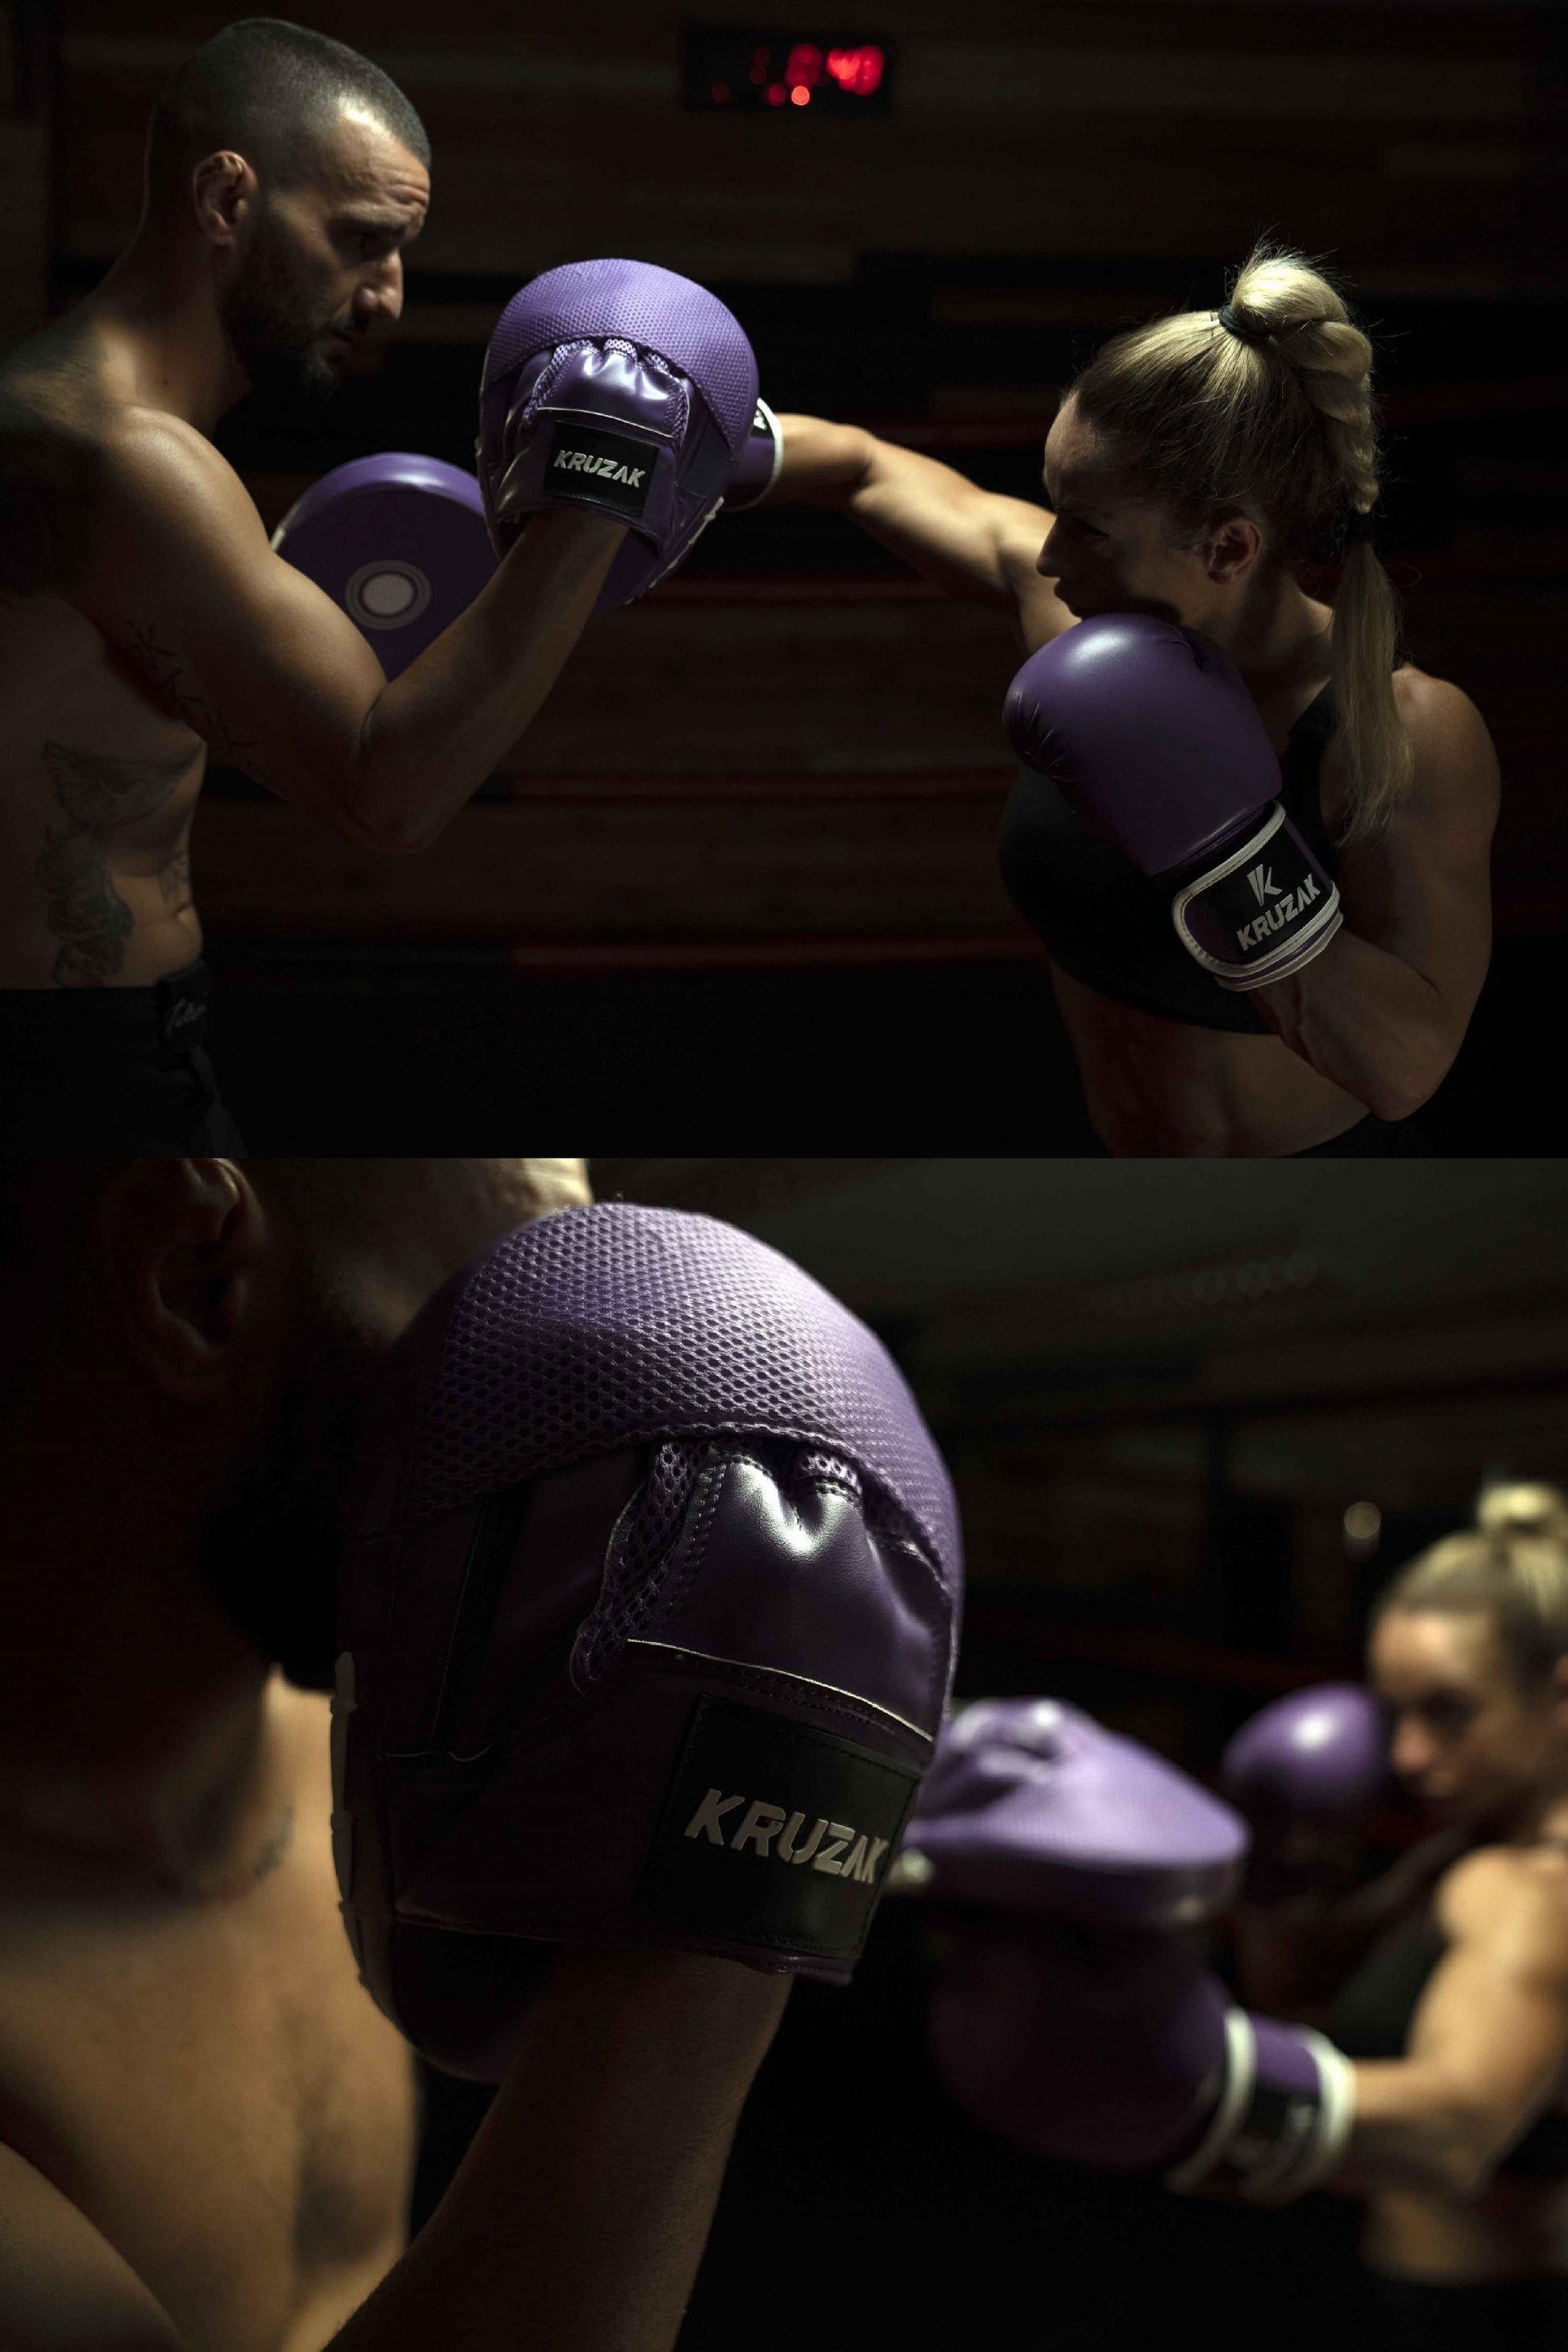 Product demonstration of Kruzak Unisex Purple Boxing Gloves and Focus Pads